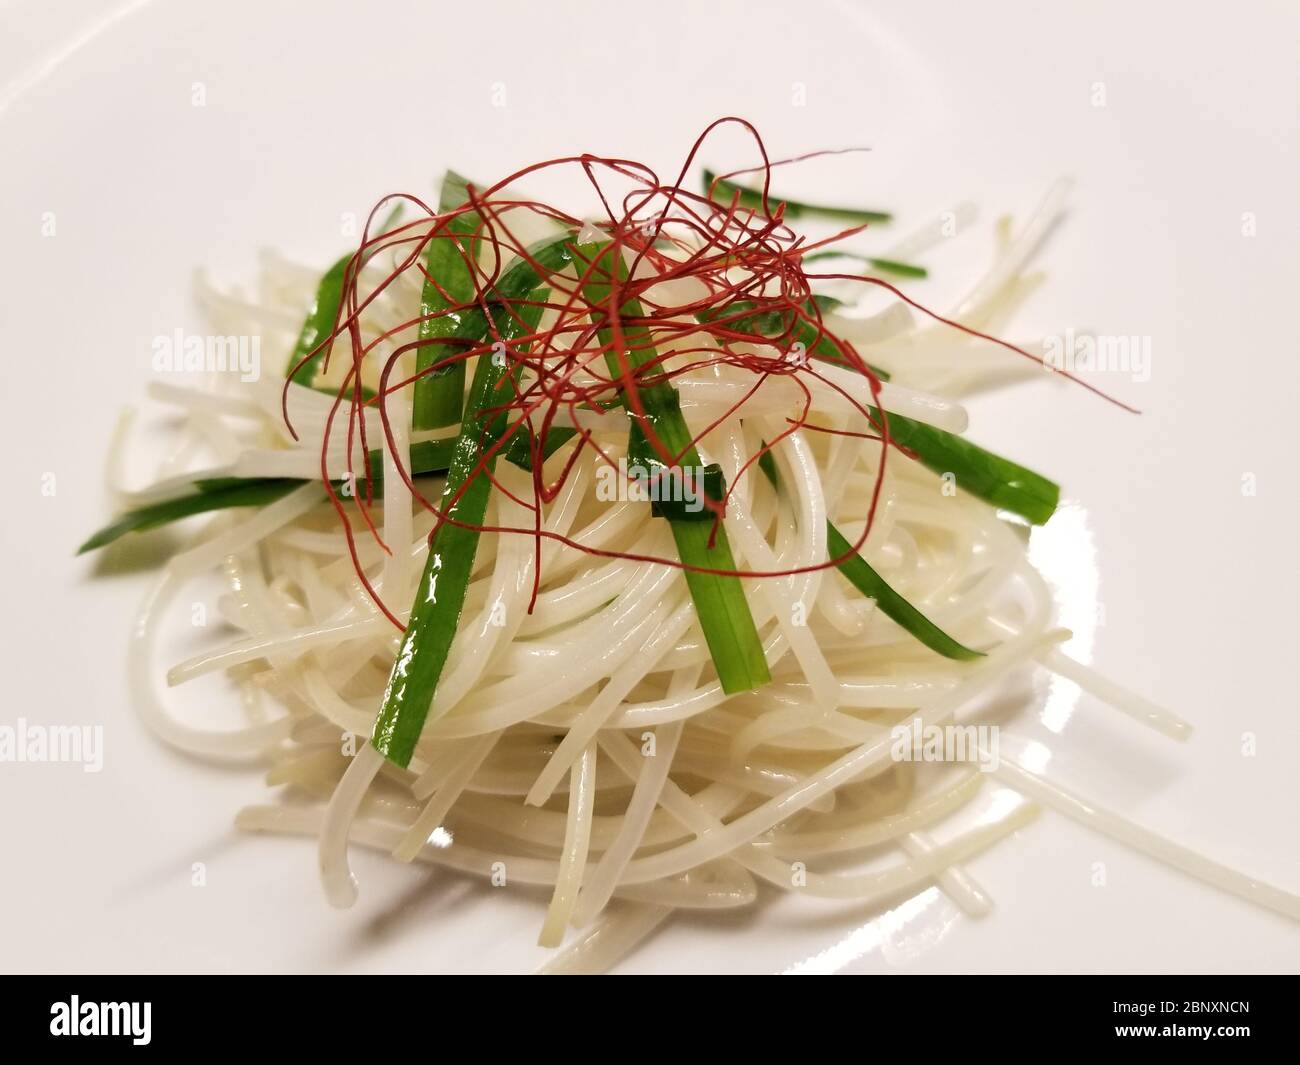 Bean sprout salad consisting of stir fried bean sprouts, chives, and stringy red pepper, on a white background Stock Photo